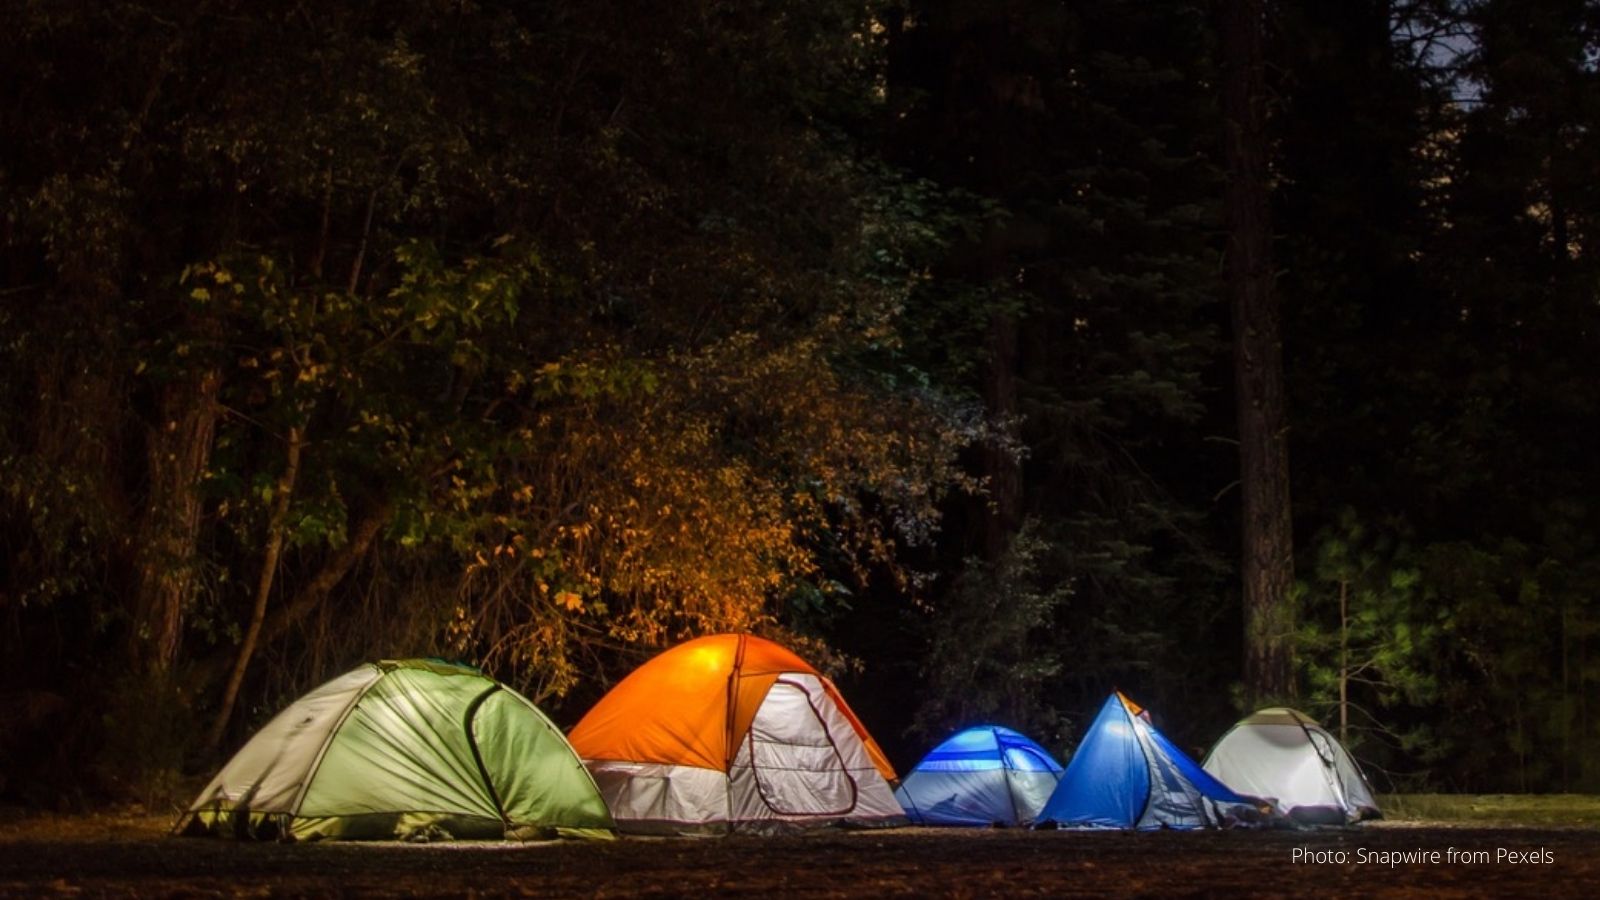 A photo of pop-up camping tents at night set up near trees.